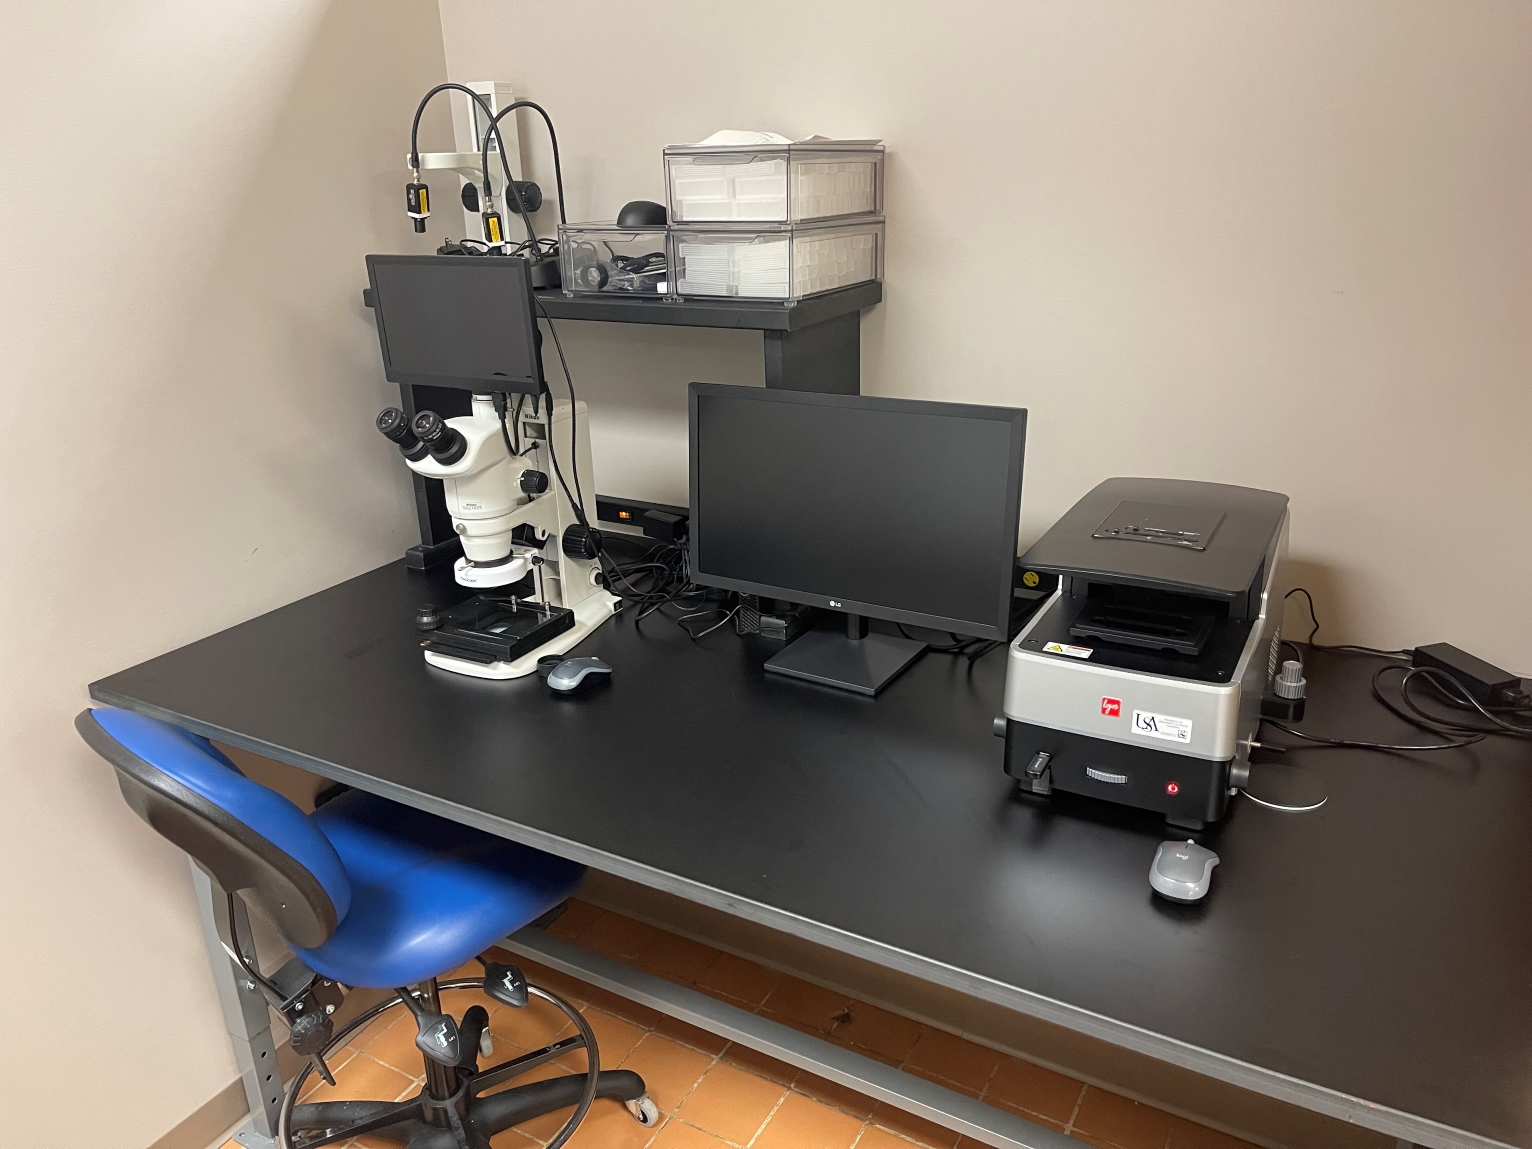 Microscope and digital imaging workstation.